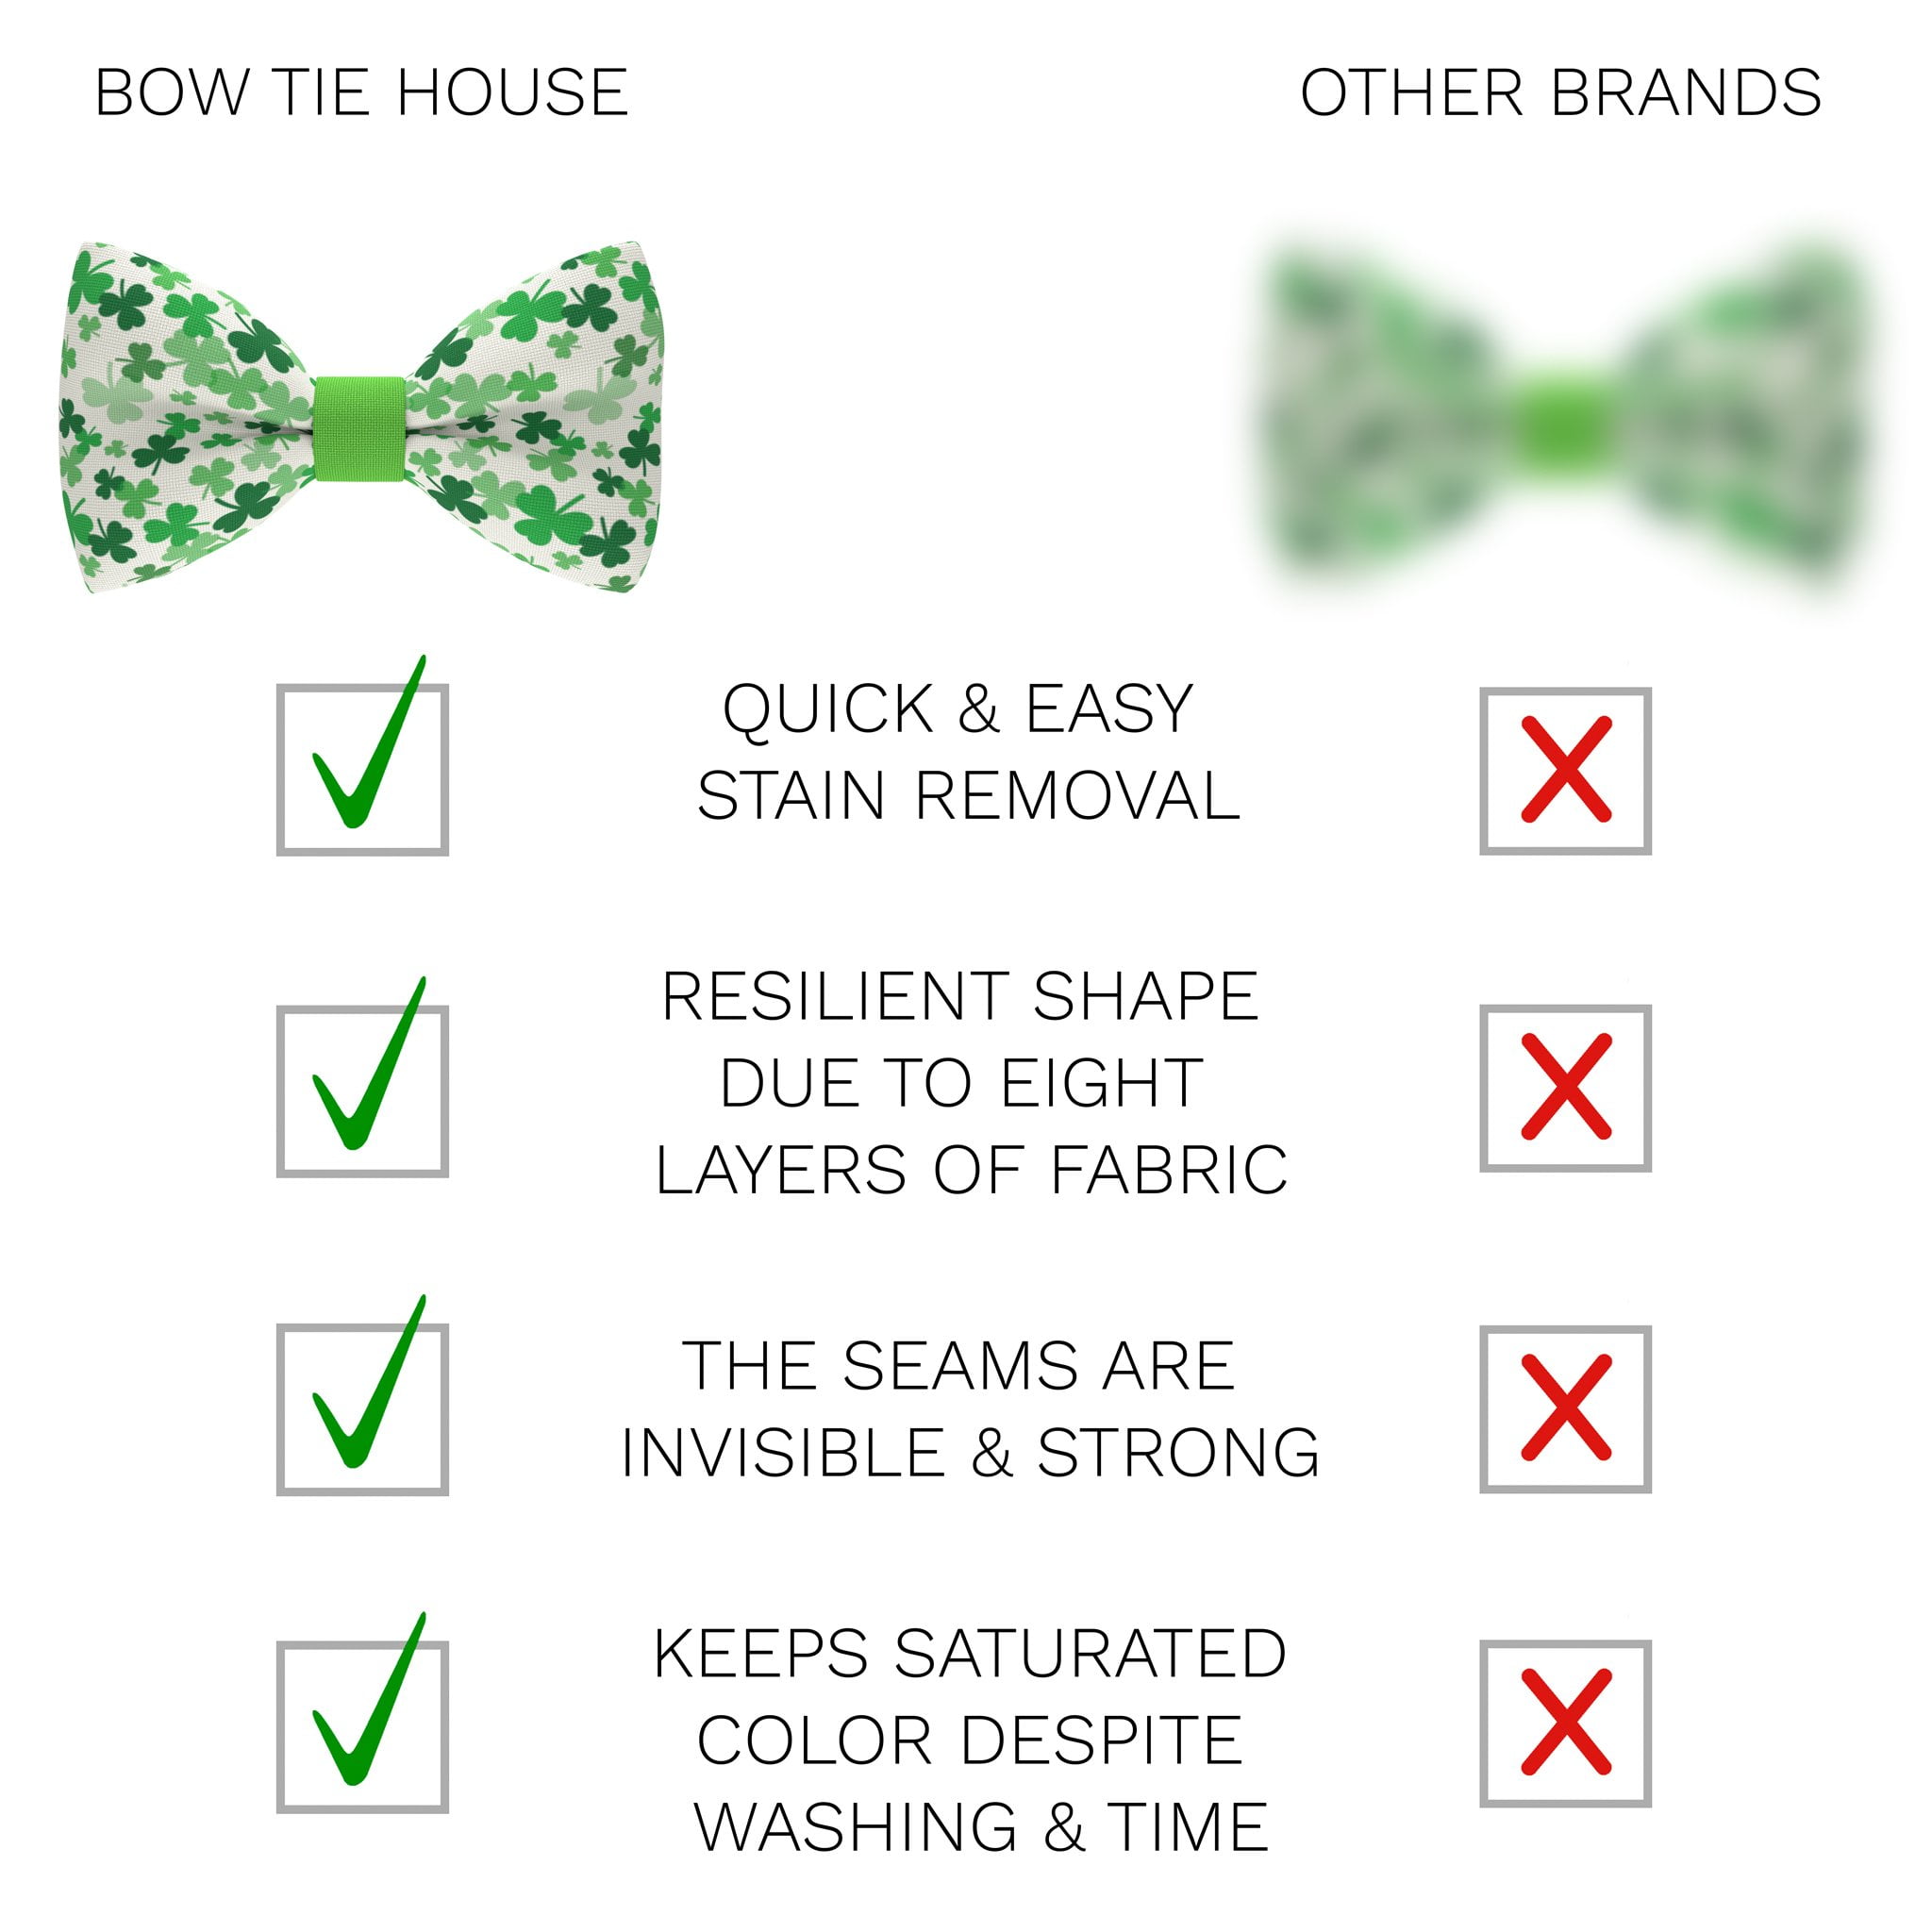 Saint Patrick`s day pattern pre-tied unisex shamrock bow tie by Bow Tie House